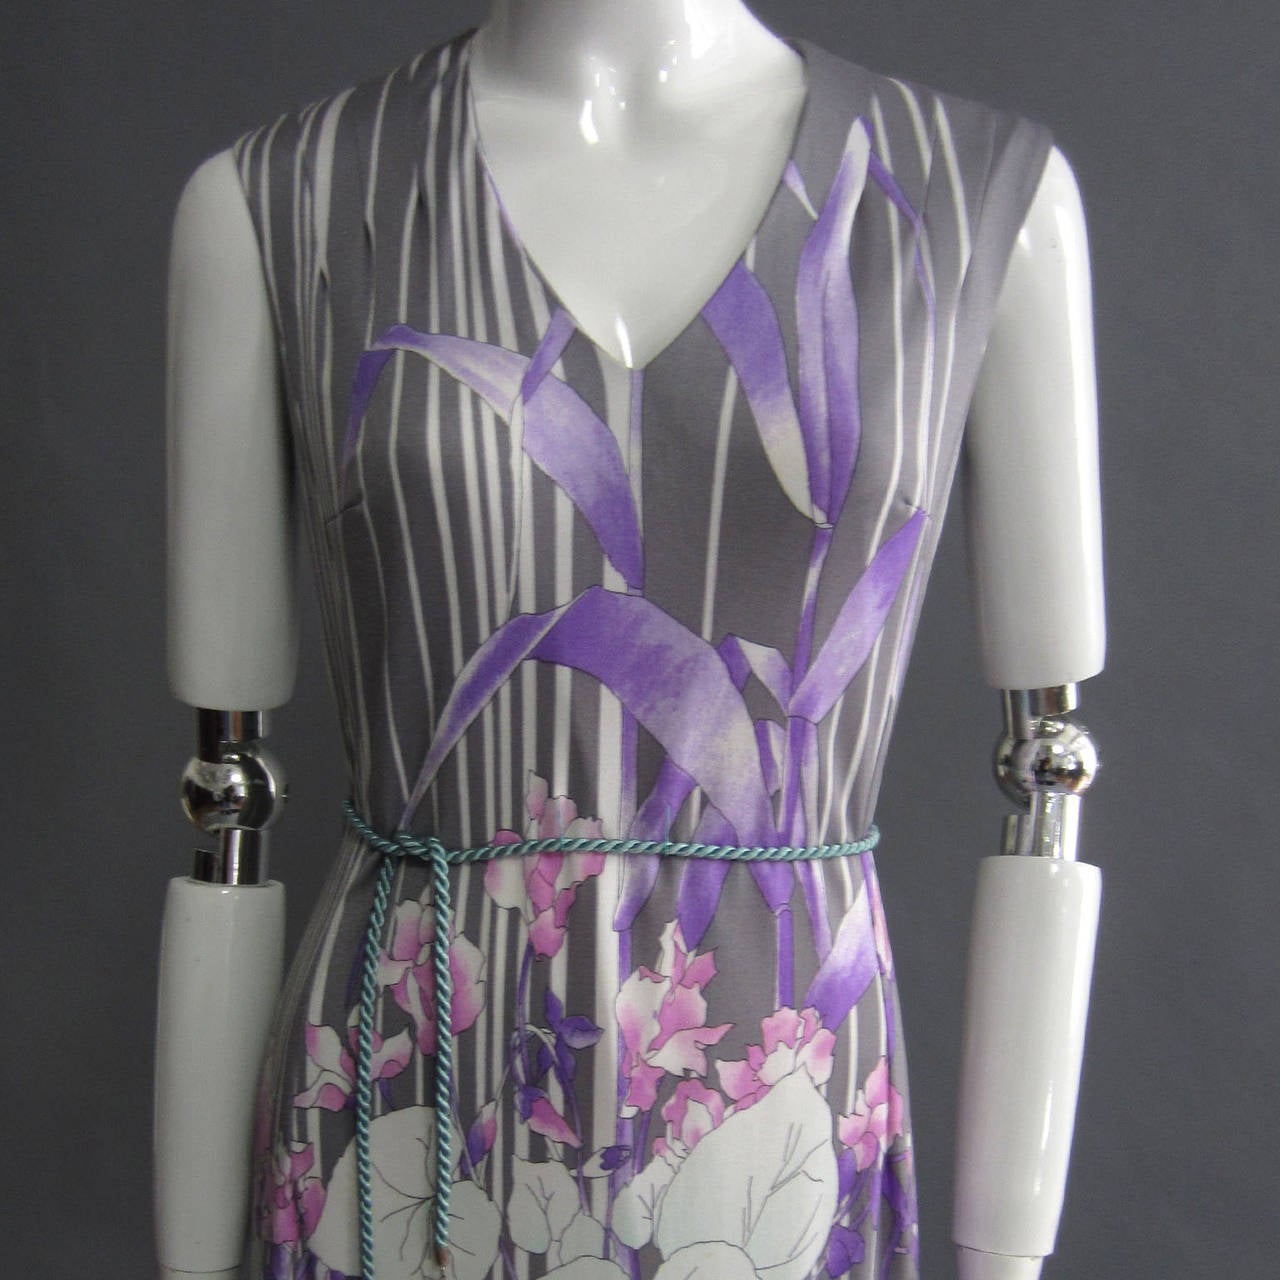 Grey, white, purple, pink and teal combine to create this intricate and modern floral print maxi dress. The print is localized and is the most ornate on the front; it clusters along the skirt with leaf details traveling up on the chest. The print is